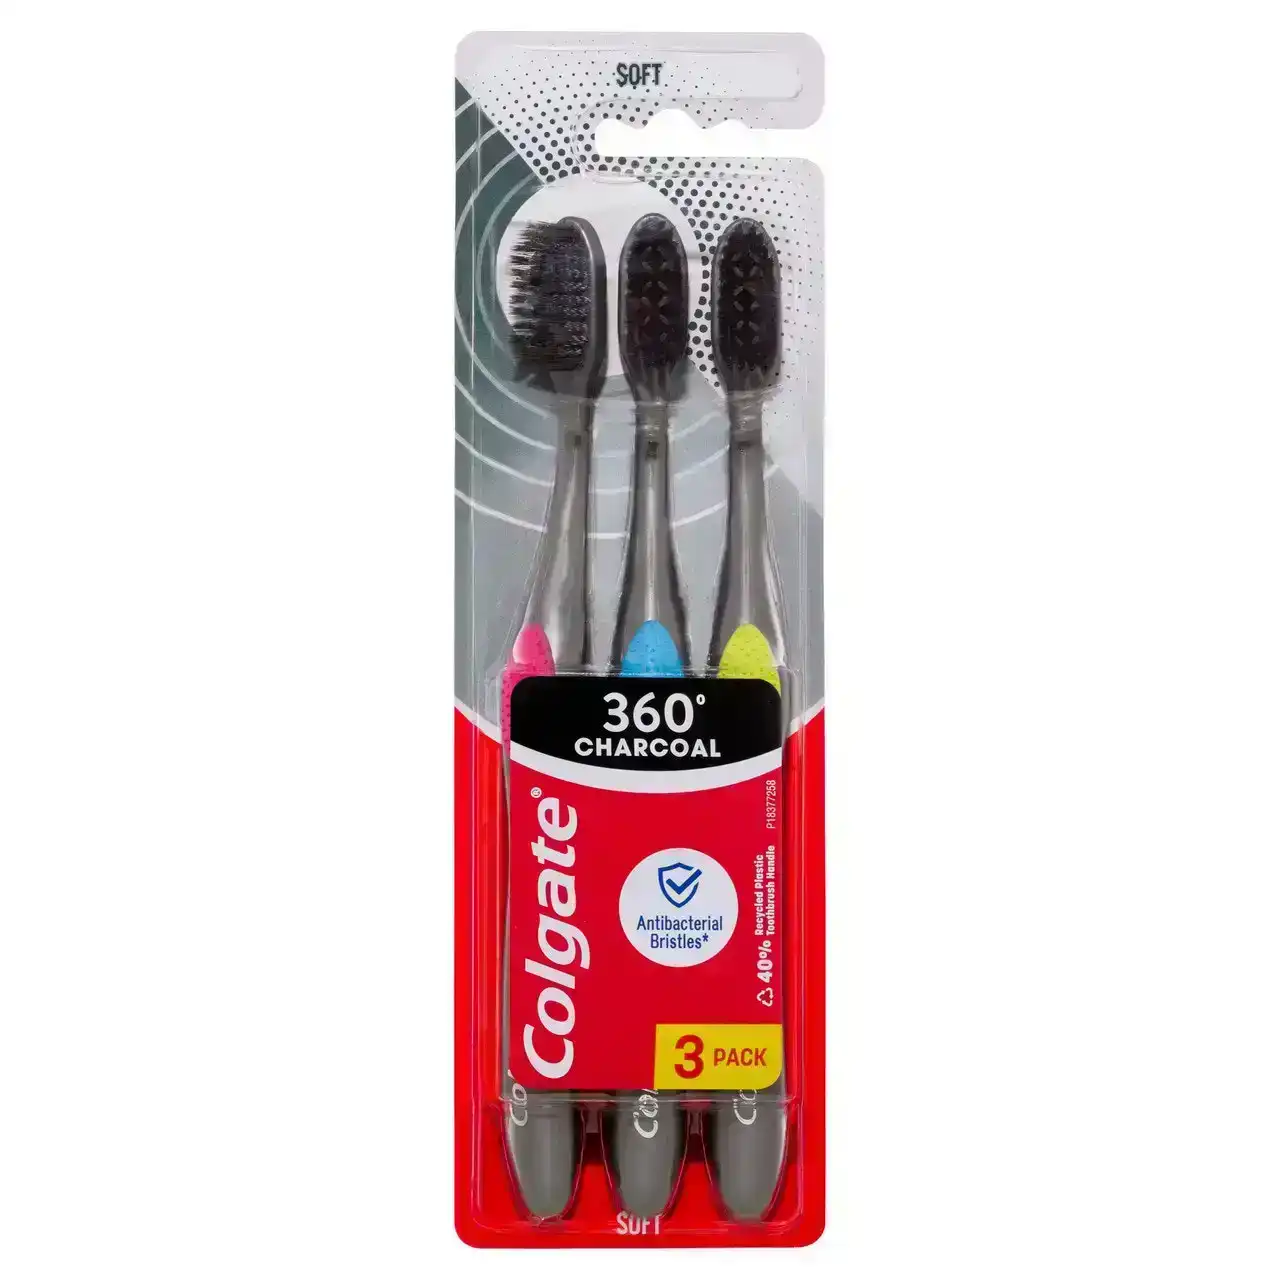 Colgate 360 Charcoal Manual Toothbrush, 3 Pack, Soft Spiral Antibacterial Bristles, Whole Mouth Clean